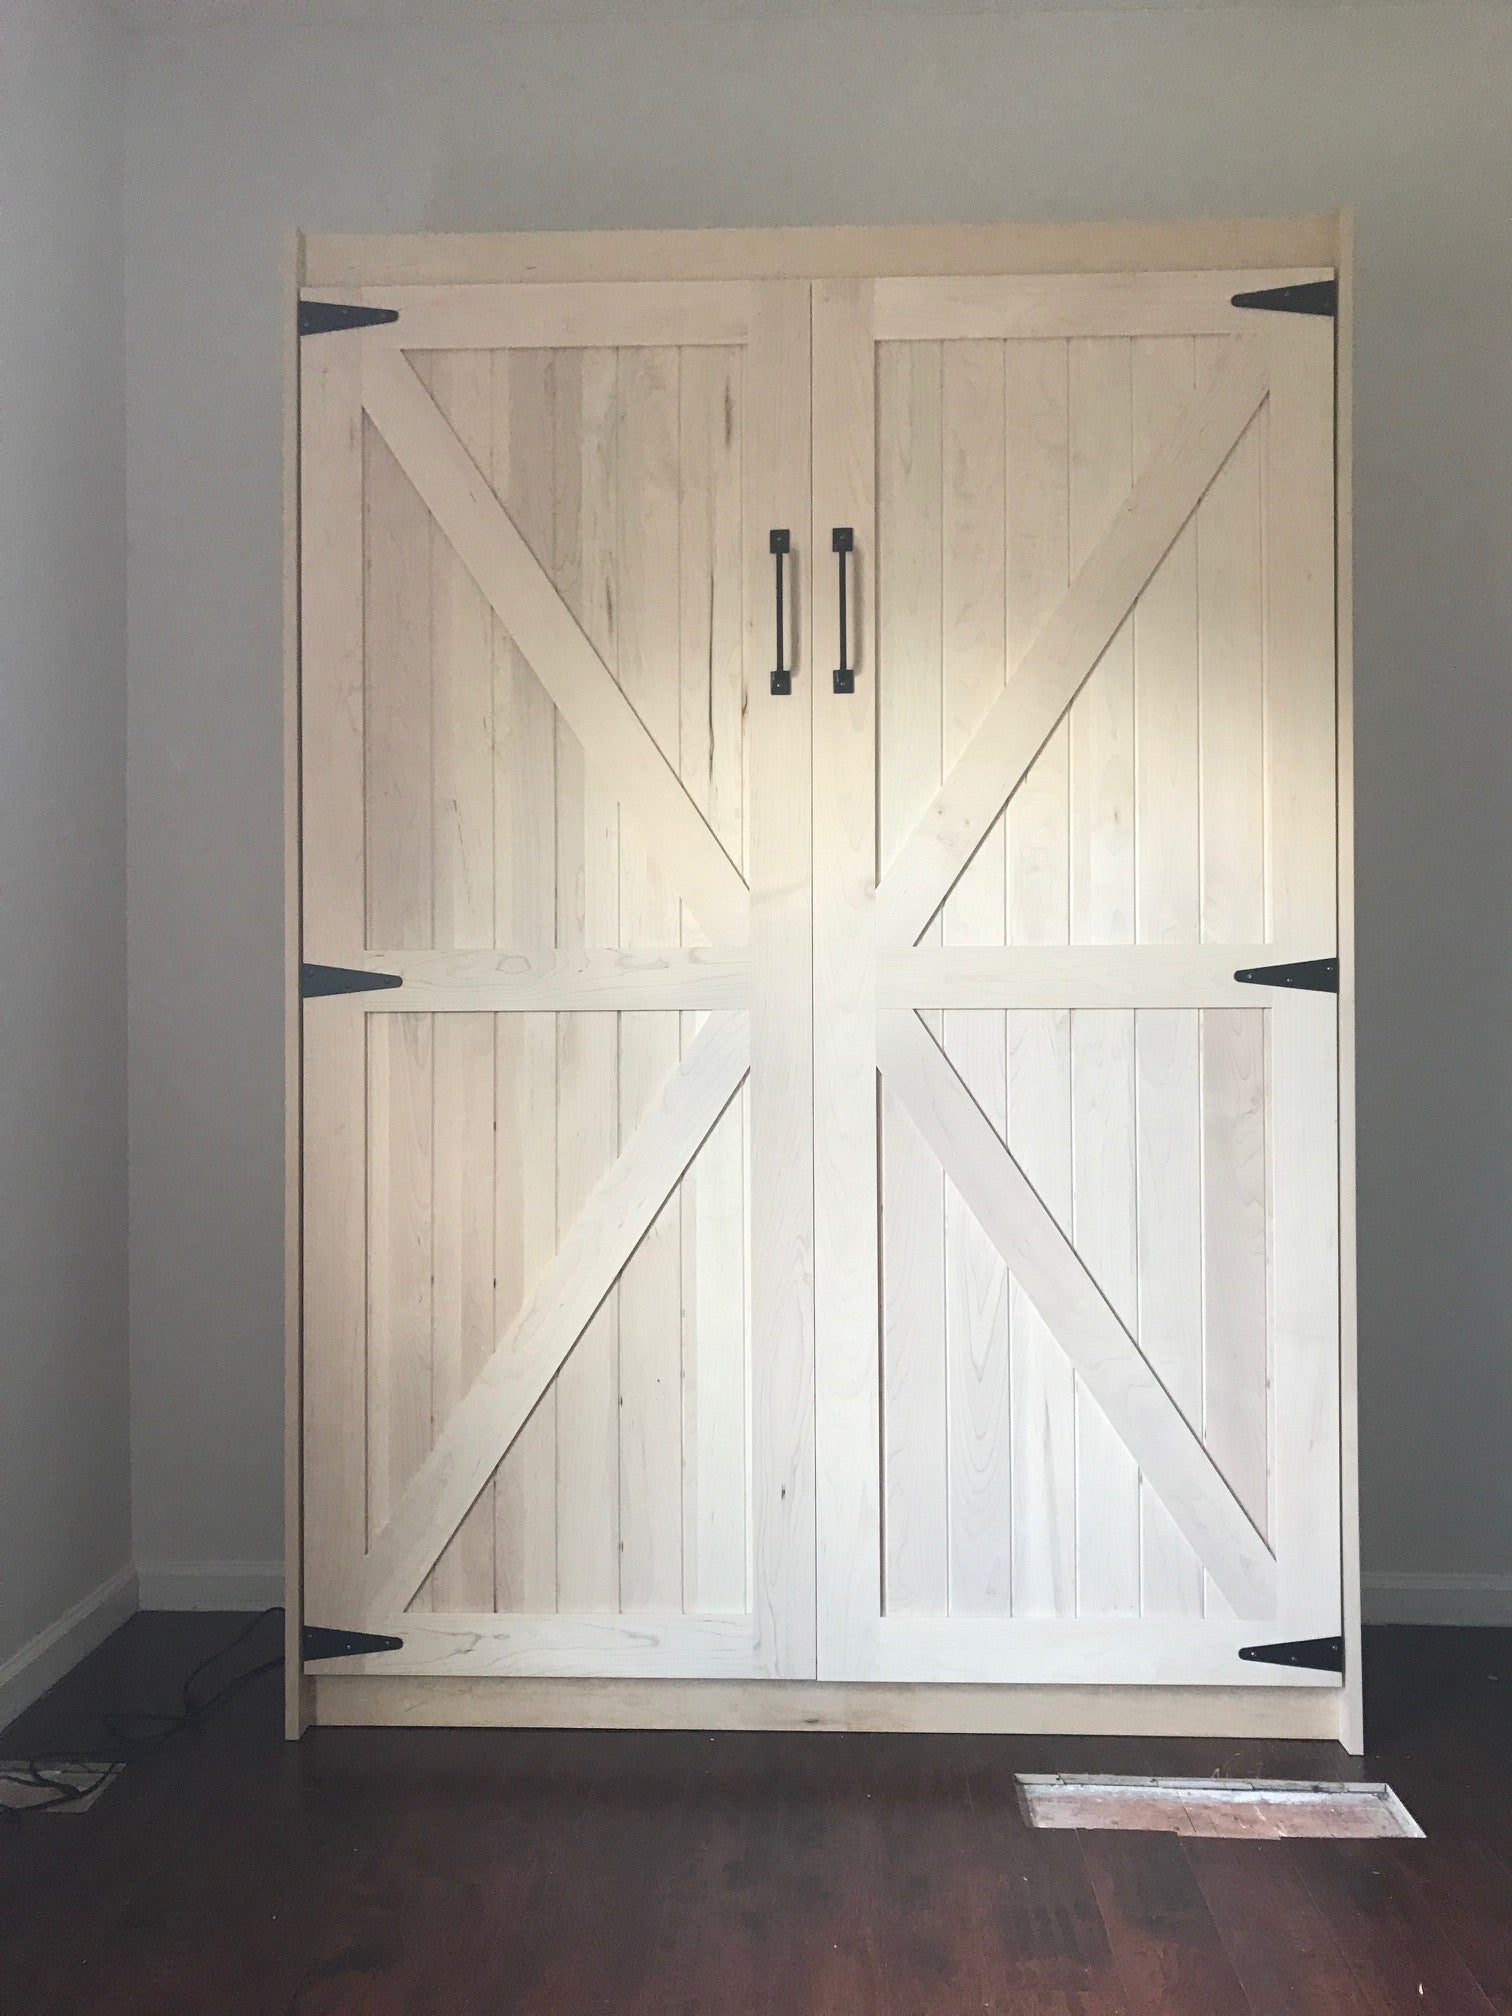 The Barn Door Panel Bed B in color white, front view